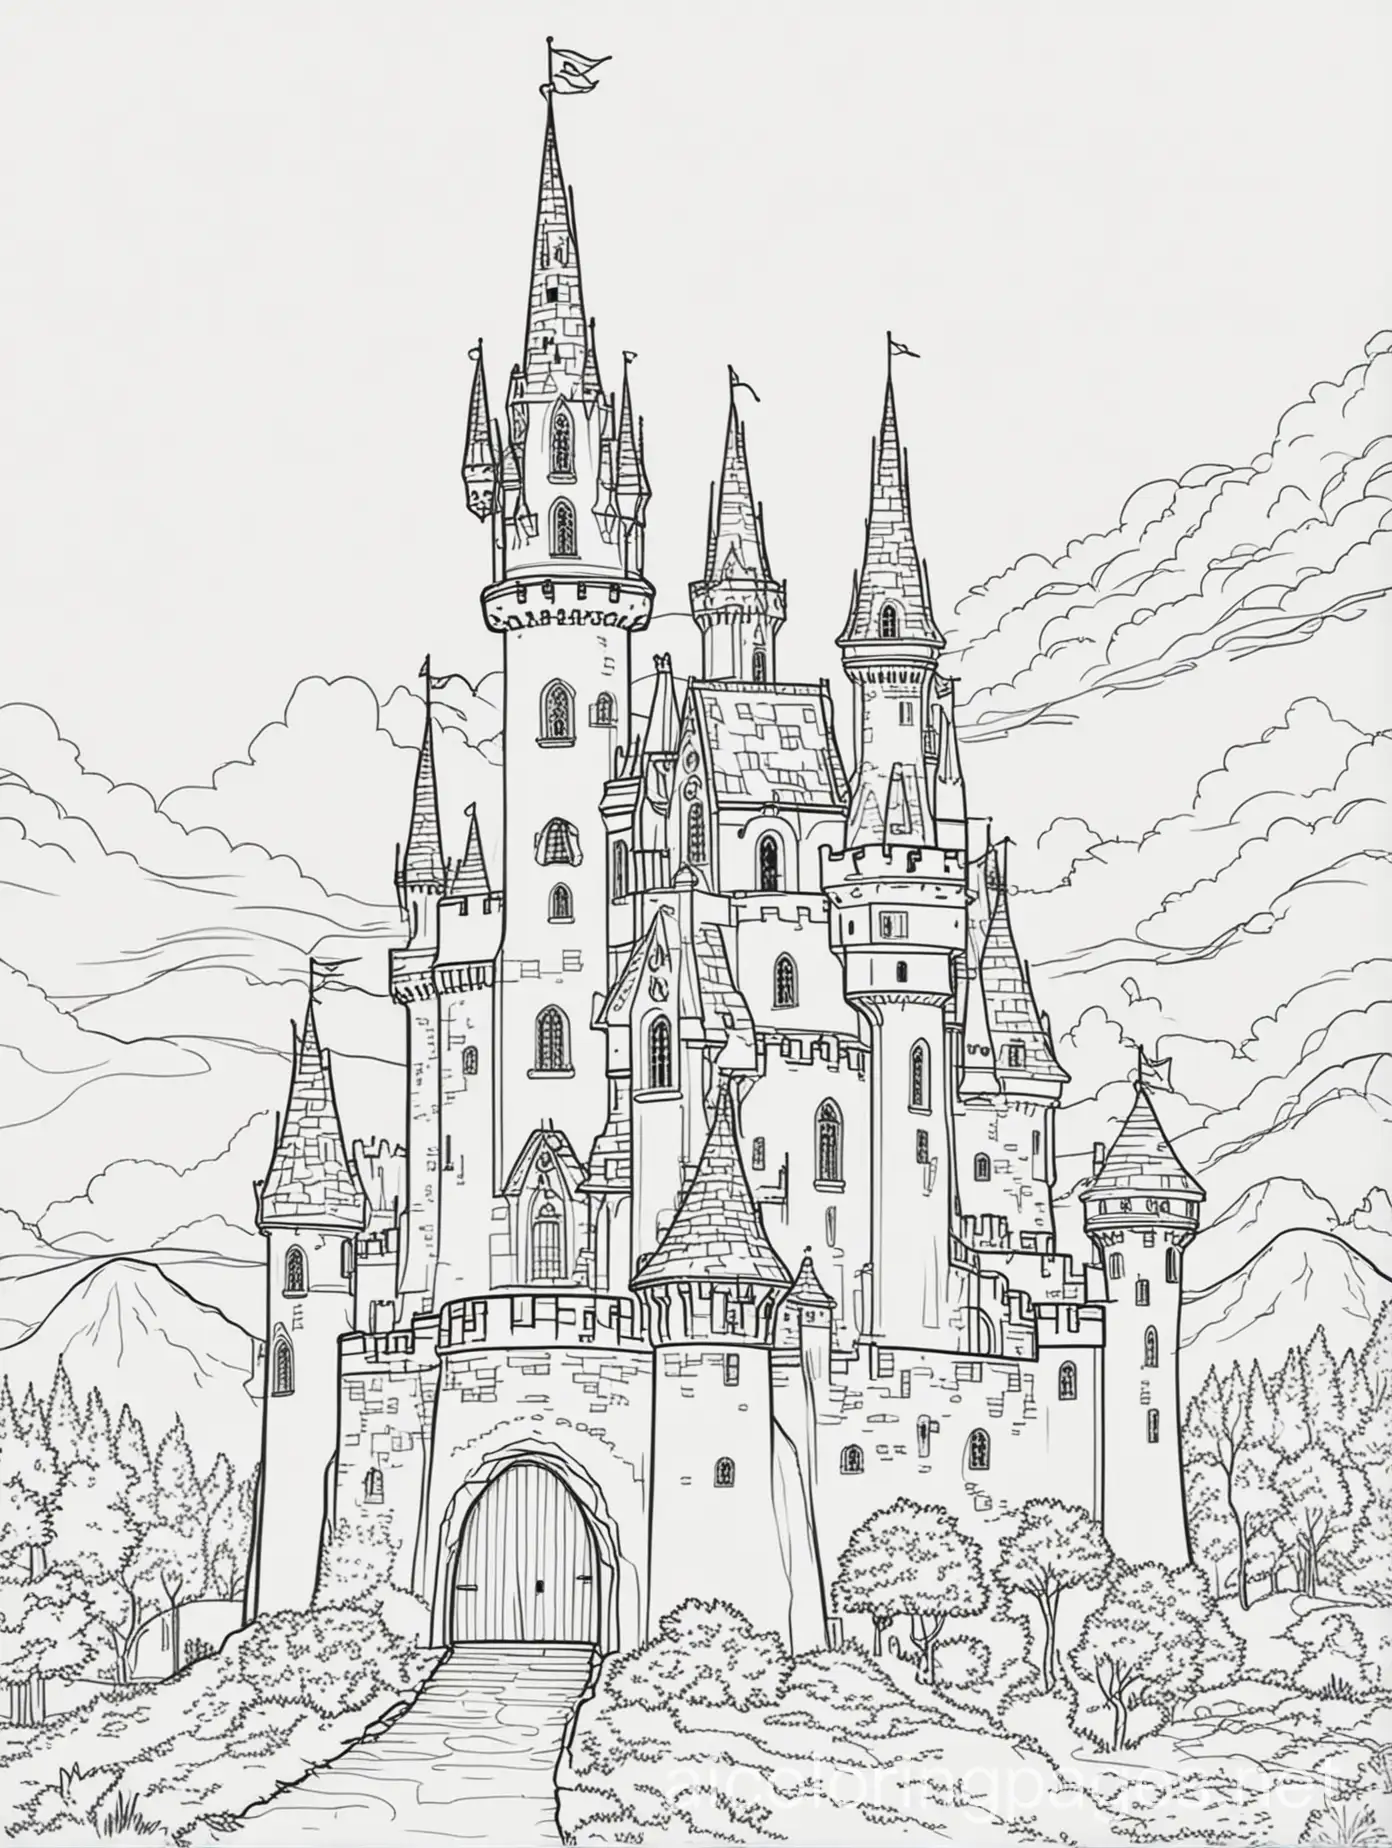 fairy tale castle, coloring page, black and white, line drawing, ample white space, no shading, Coloring Page, black and white, line art, white background, Simplicity, Ample White Space. The background of the coloring page is plain white to make it easy for young children to color within the lines. The outlines of all the subjects are easy to distinguish, making it simple for kids to color without too much difficulty, Coloring Page, black and white, line art, white background, Simplicity, Ample White Space. The background of the coloring page is plain white to make it easy for young children to color within the lines. The outlines of all the subjects are easy to distinguish, making it simple for kids to color without too much difficulty